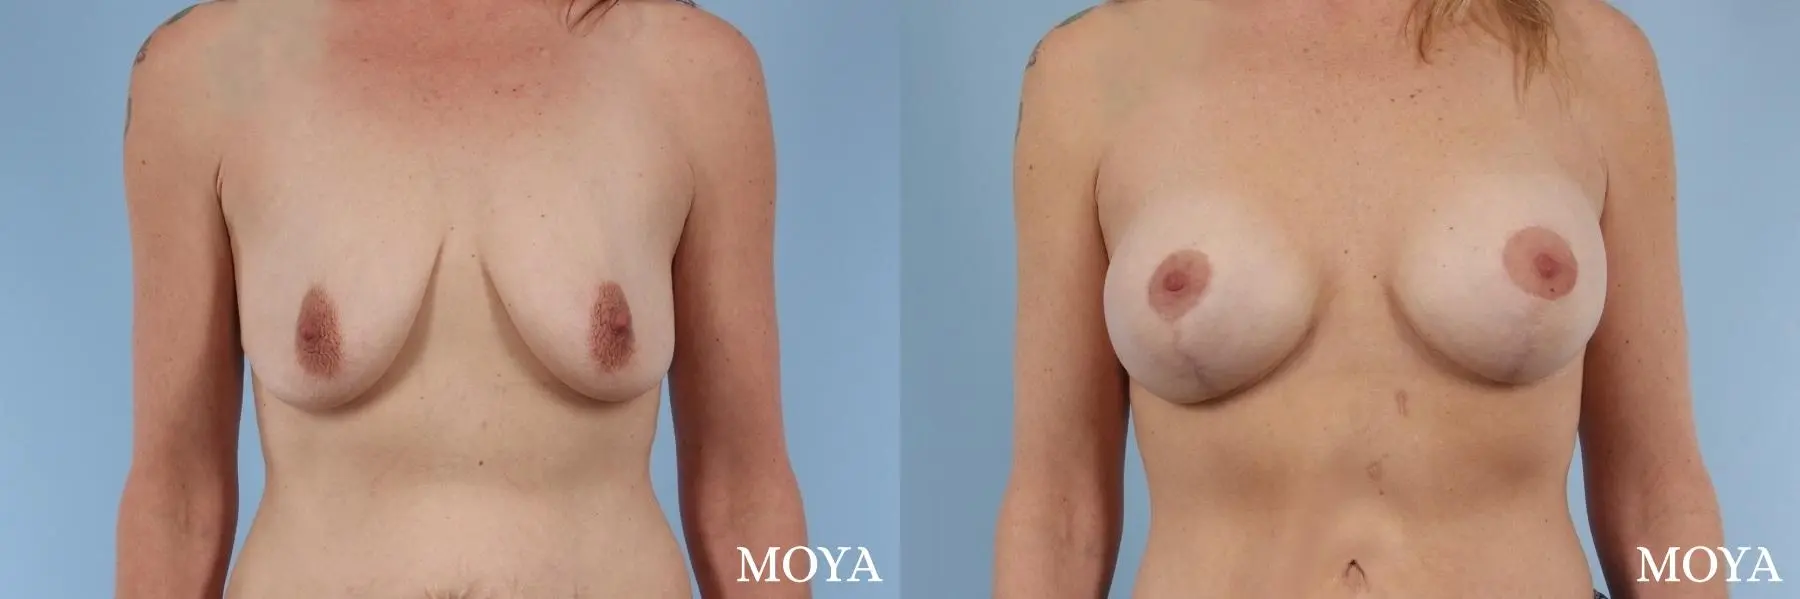 Breast Augmentation With Lift: Patient 12 - Before and After 1